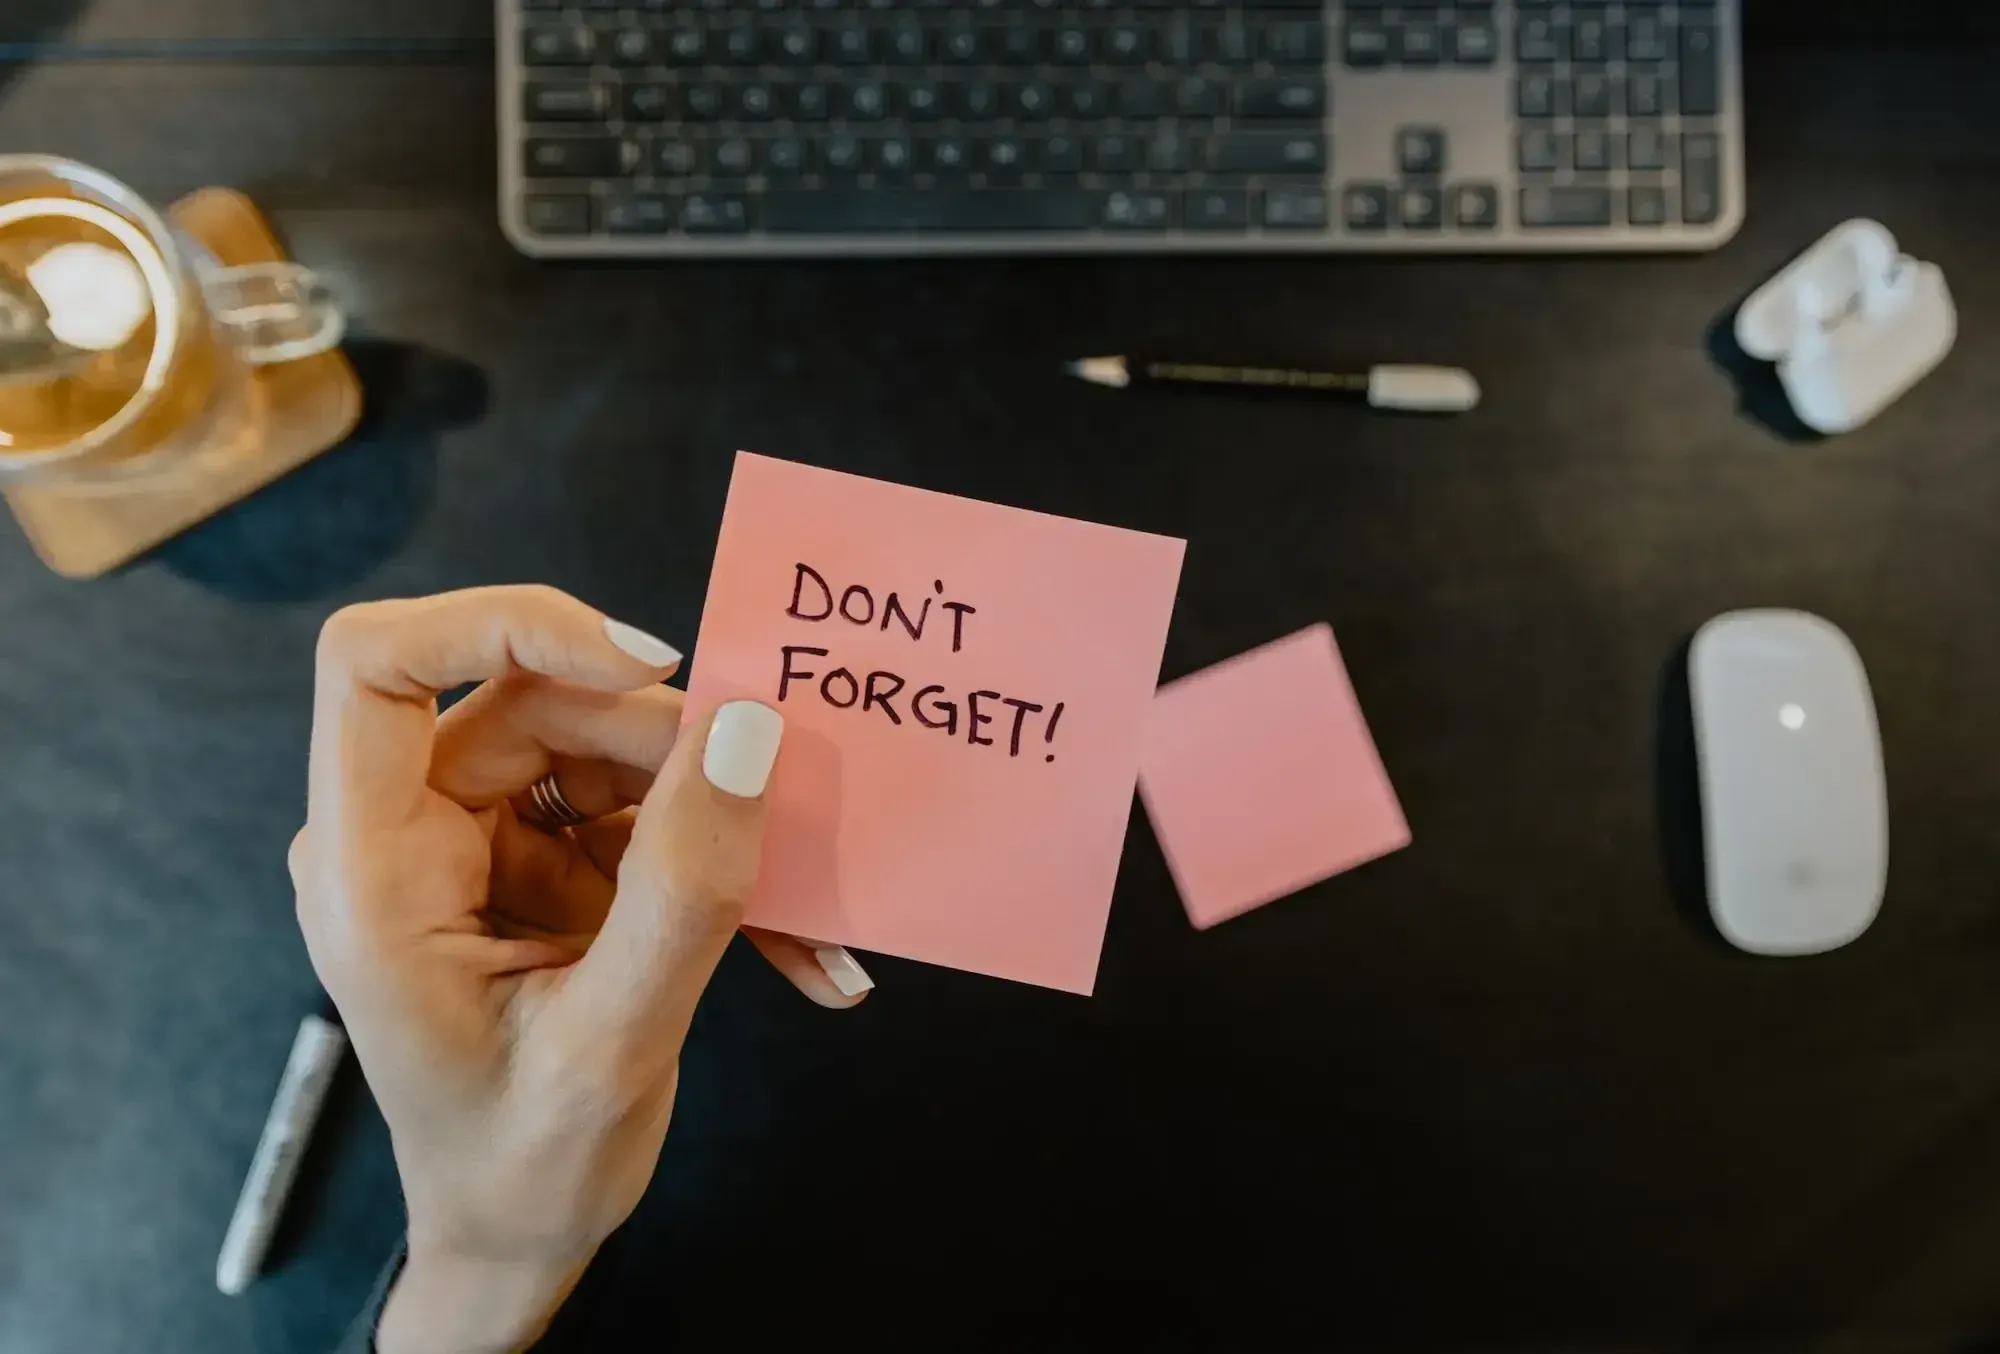 Hand with white nail polish and a golden ring holding a post-it with "Don't forget!" on it. In the background there's a desk with a keyboard, mouse, pens and a glas.